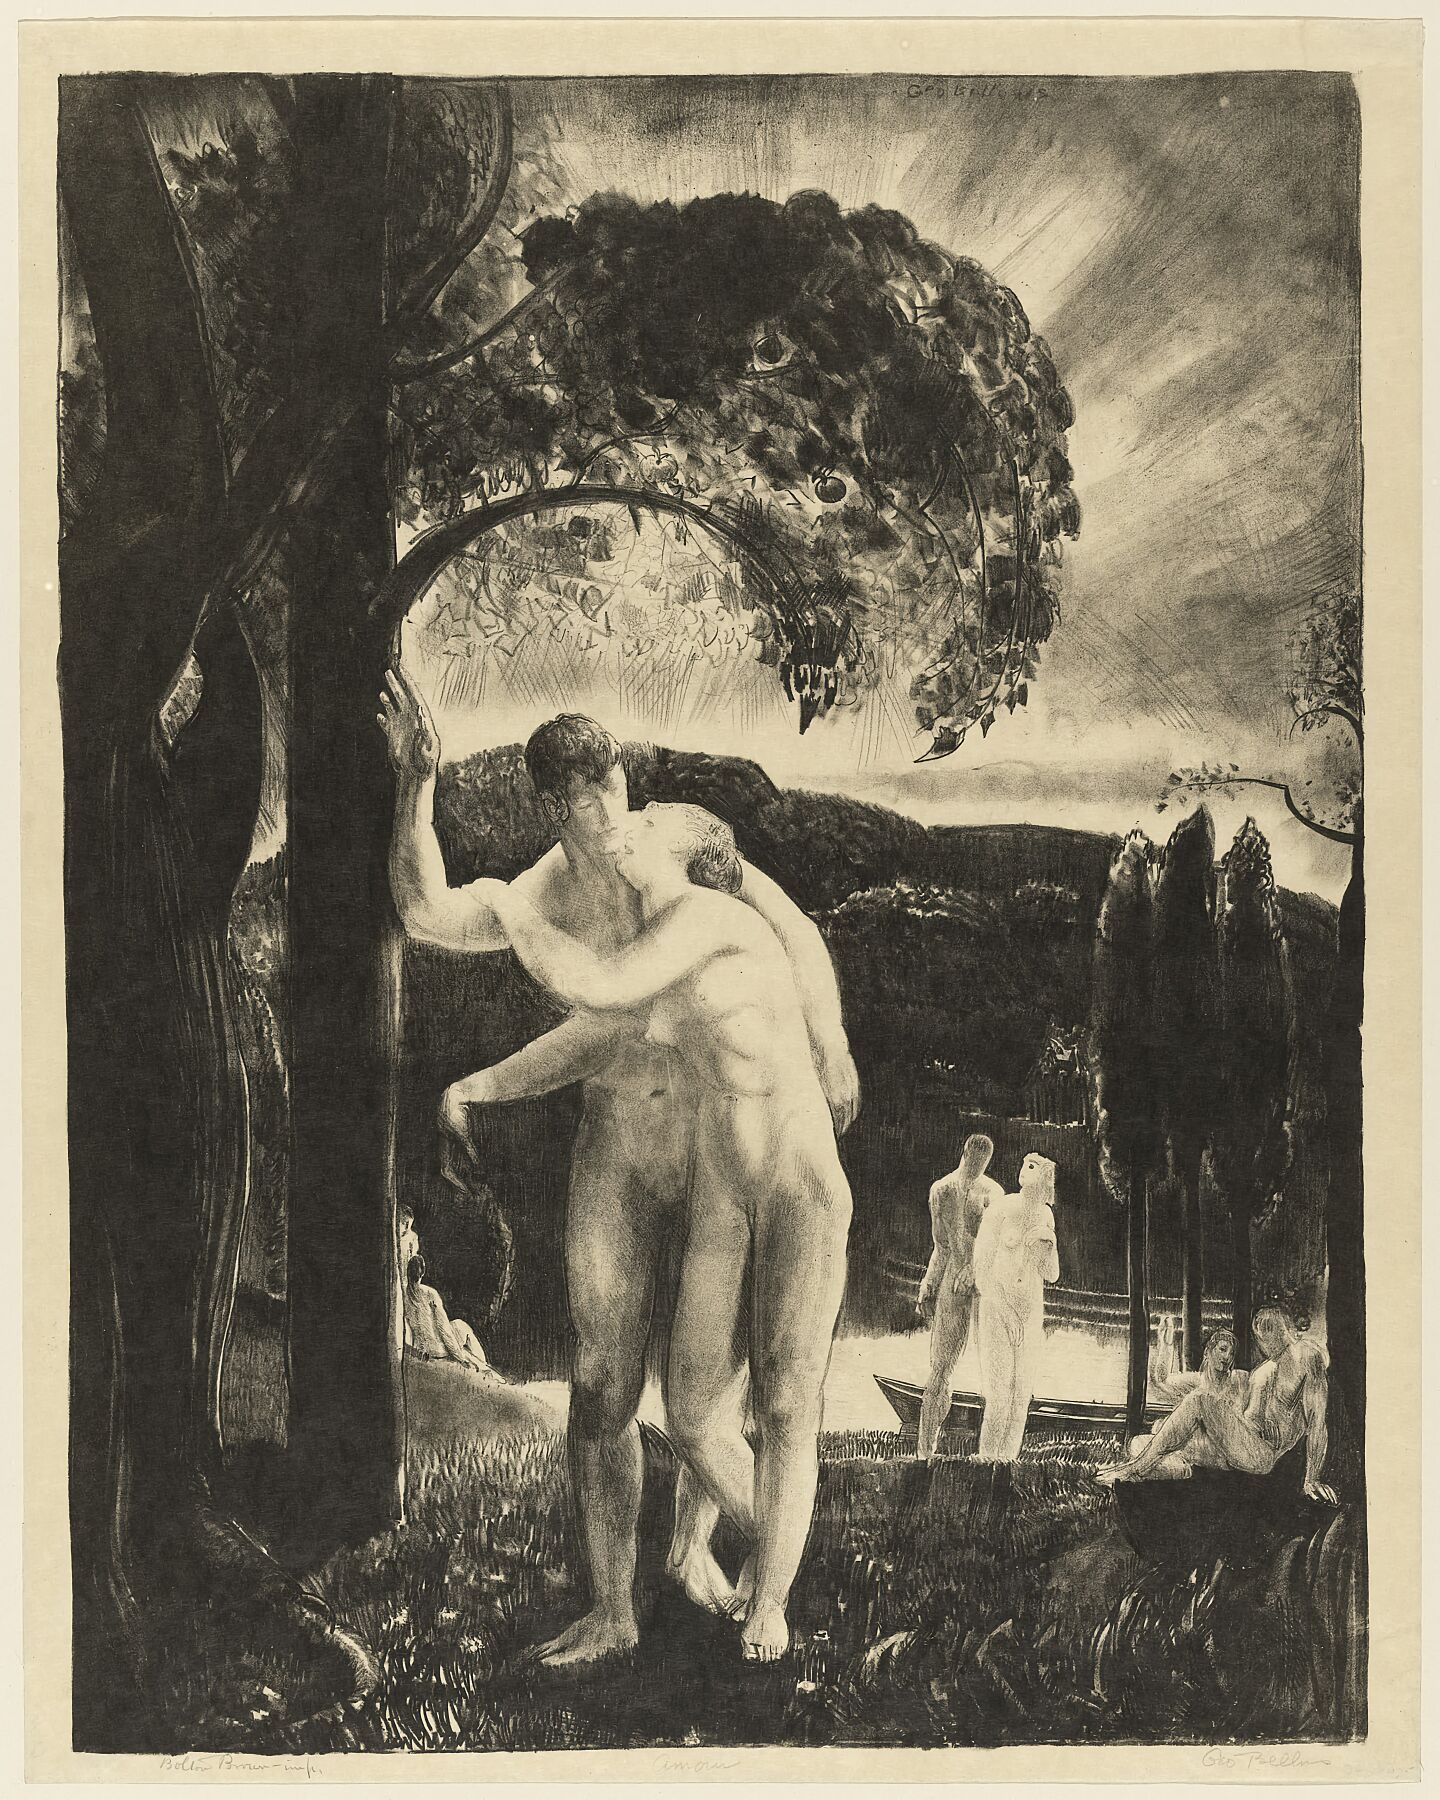 Amour by George Bellows - 1923